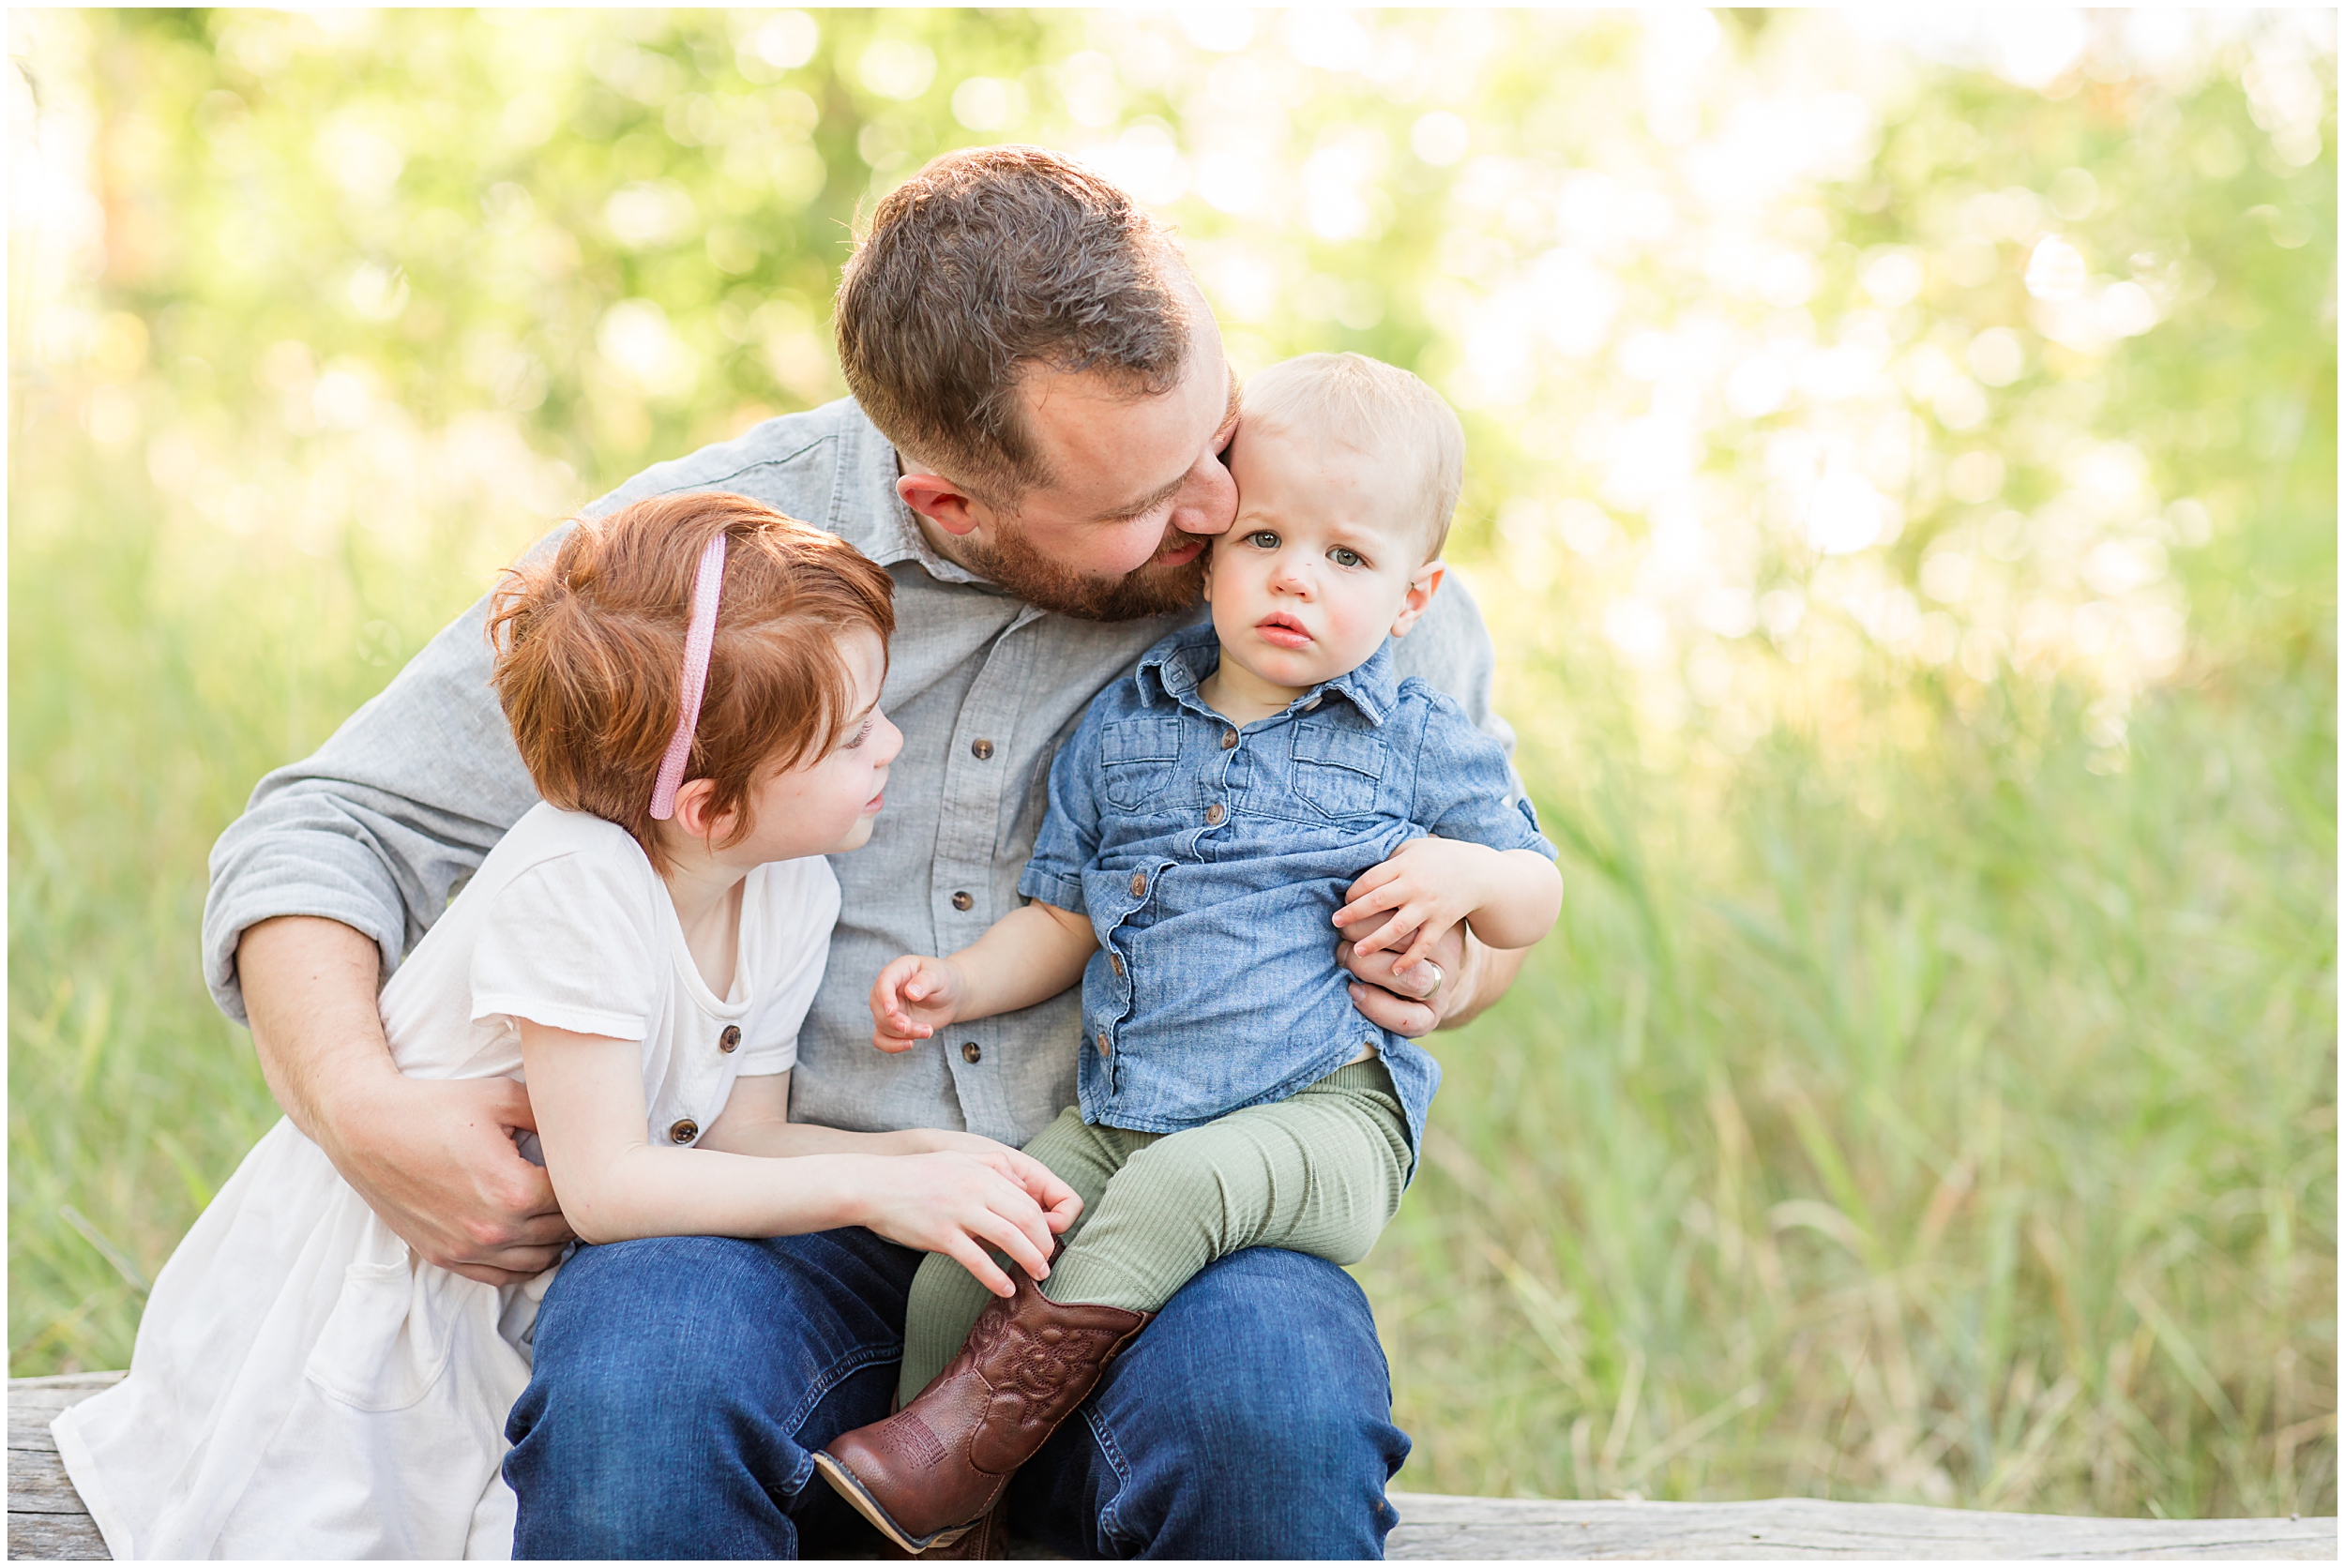 Father hugging children in a joyful moment, captured in a mini family session by Theresa Pelser Photography